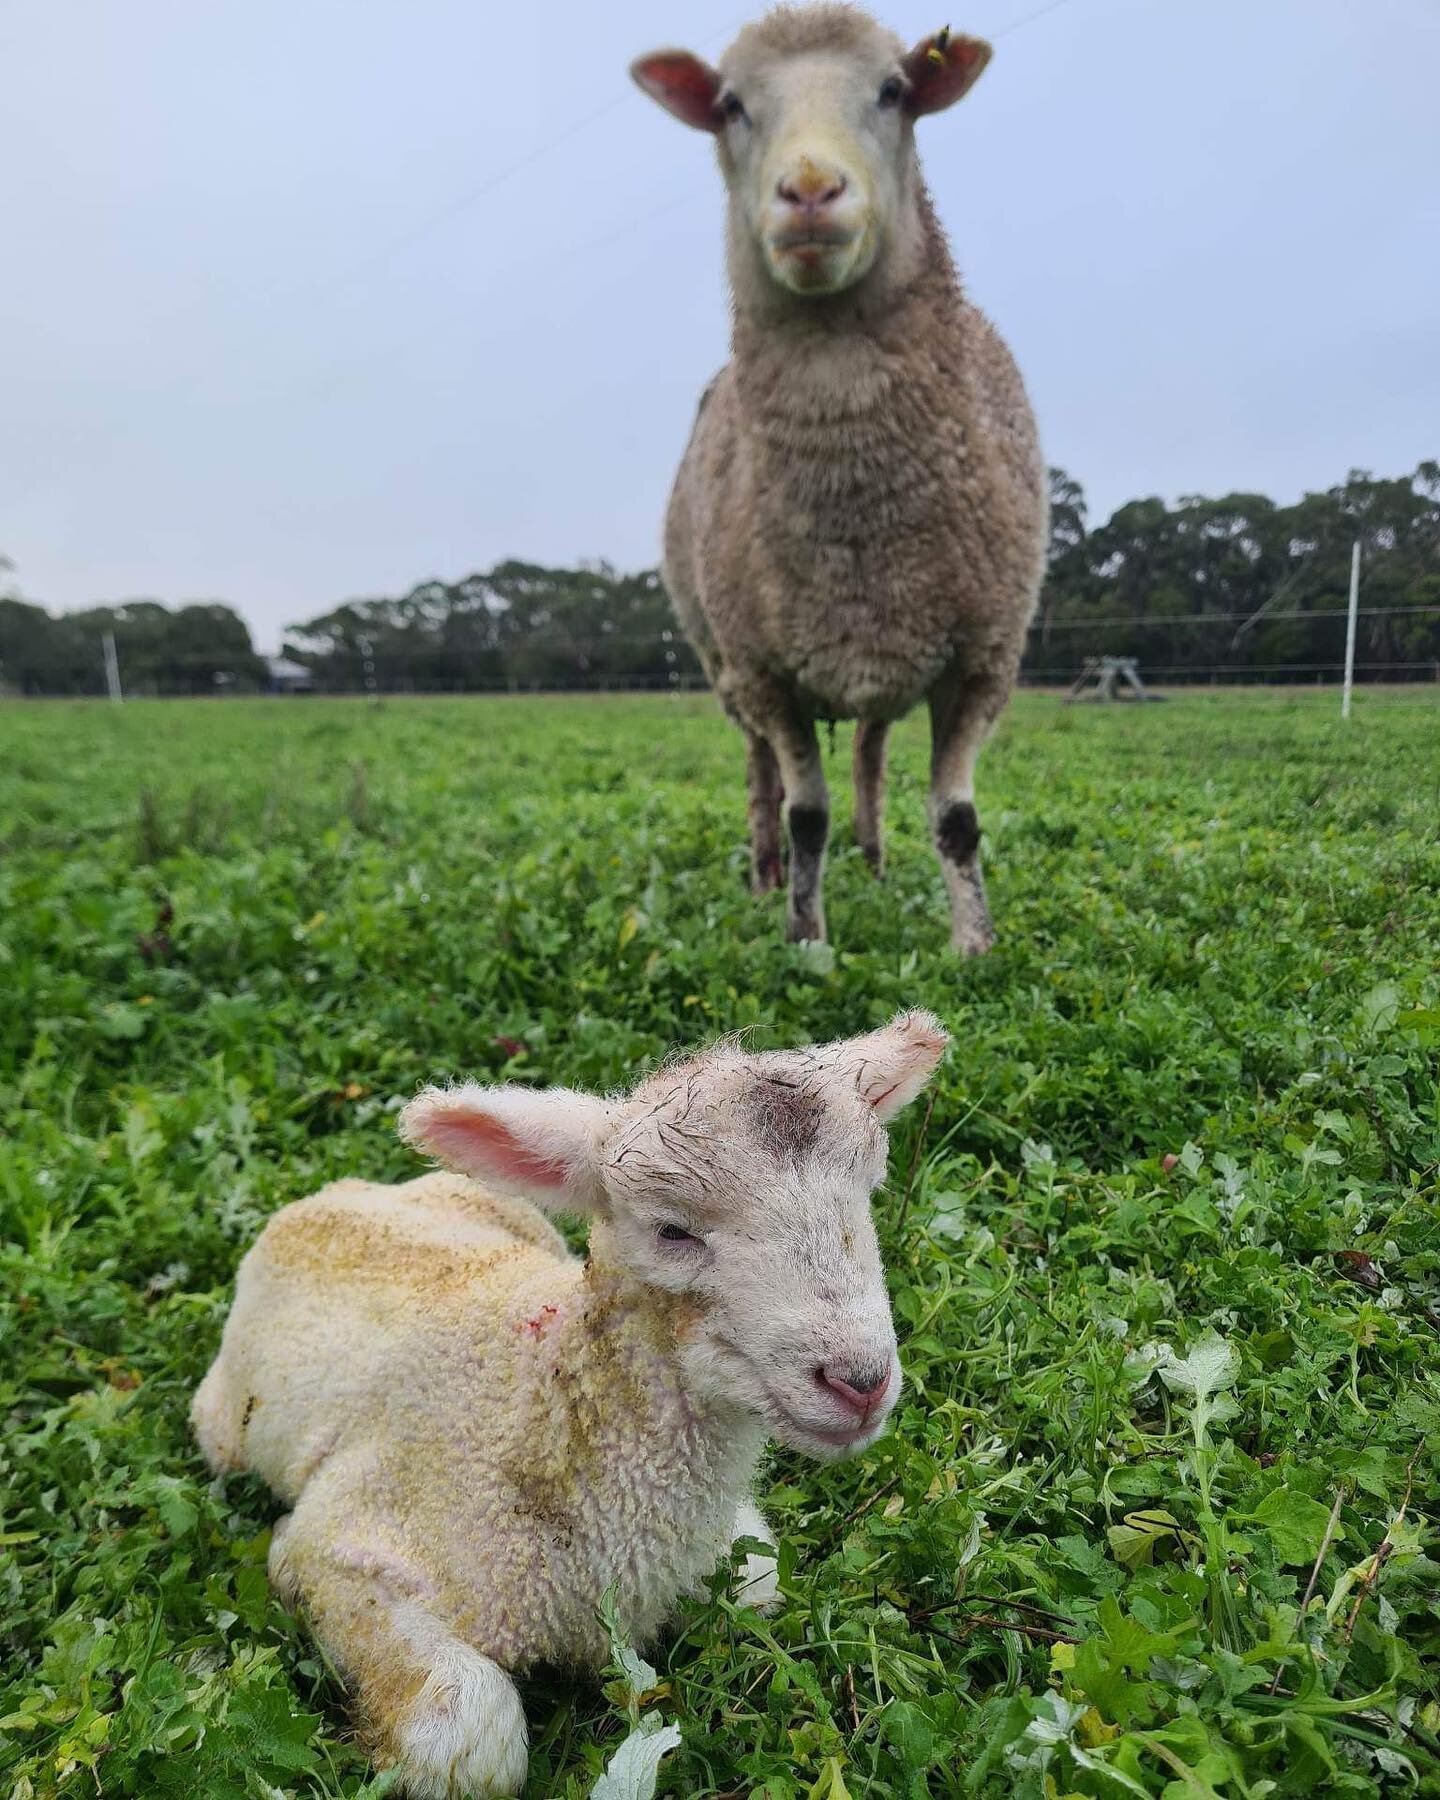 ***** BIRTH ANNOUNCEMENT *****

This morning we welcomed the first baby lamb of the season! Farmer Dave managed to snap this very sweet picture of mum and bubs in the paddock. Guests staying this weekend may be lucky enough to witness another birth o